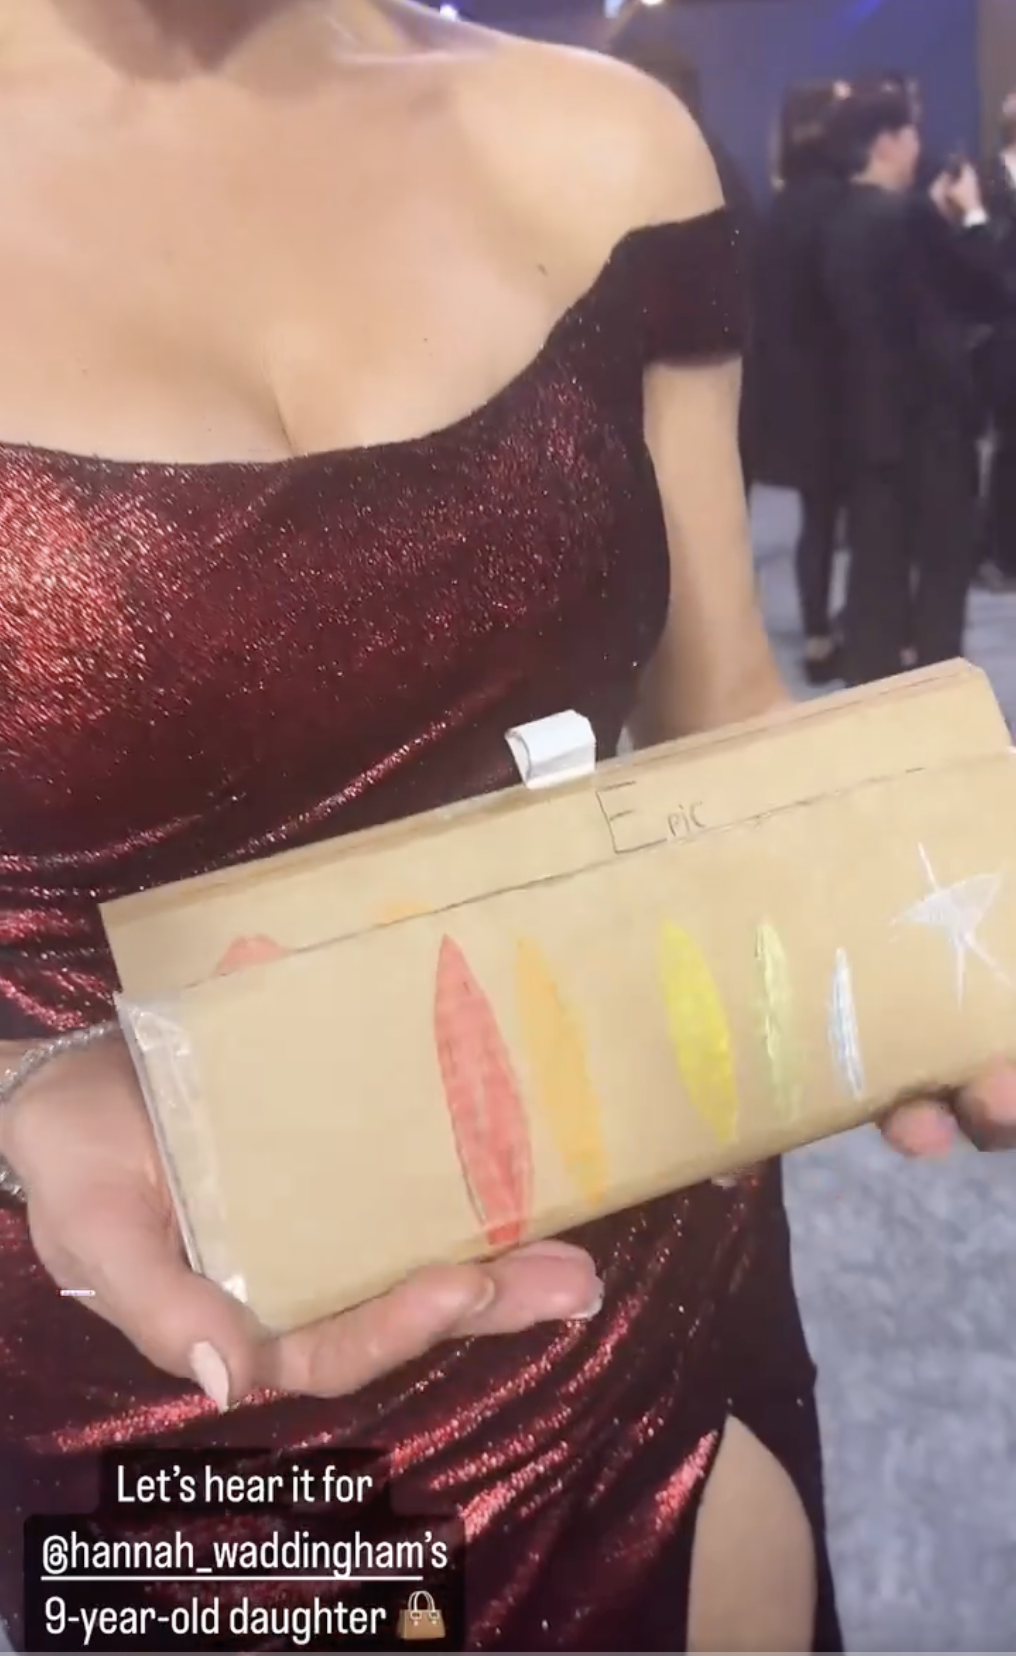 The host of the Ukrainian Eurovision Song Contest in the UK came to the prestigious event with a bag made by her 9-year-old daughter